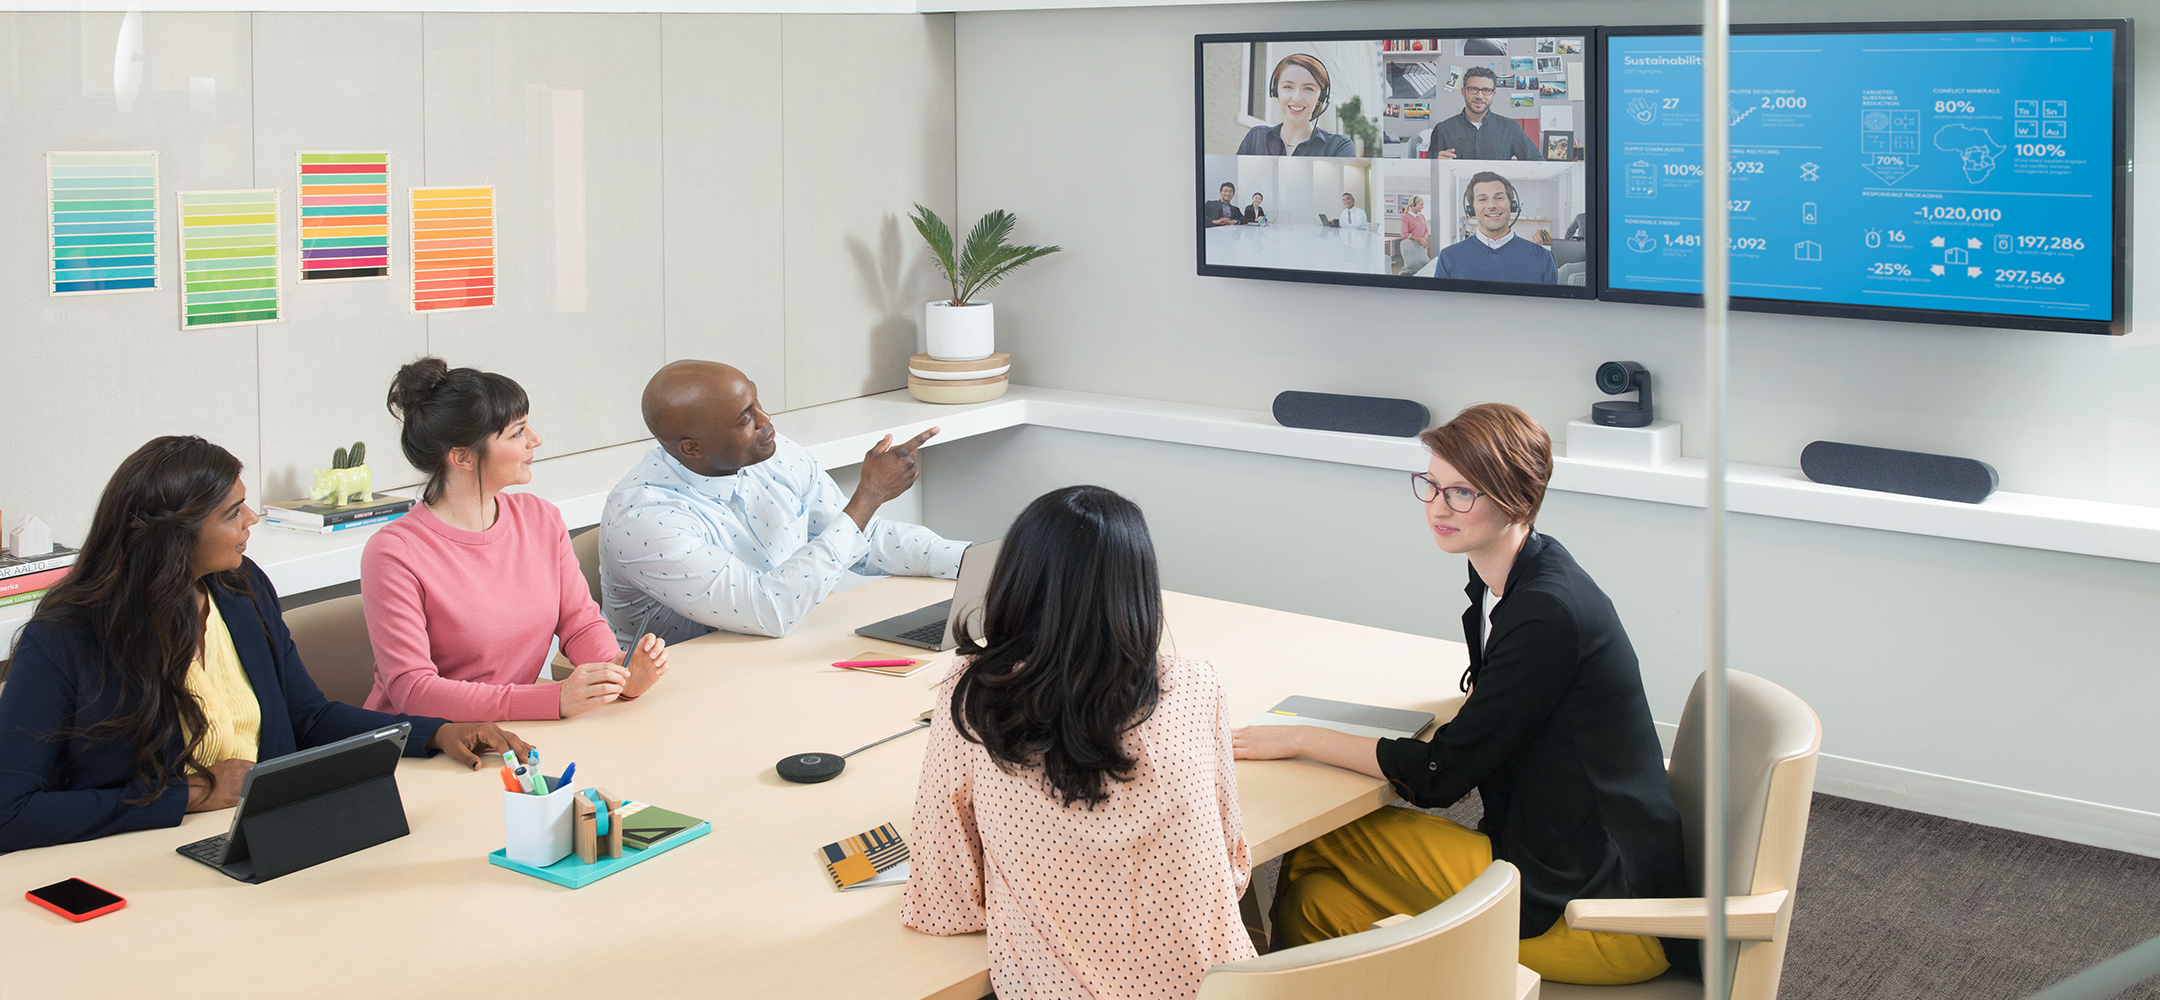 USB Video Conferencing